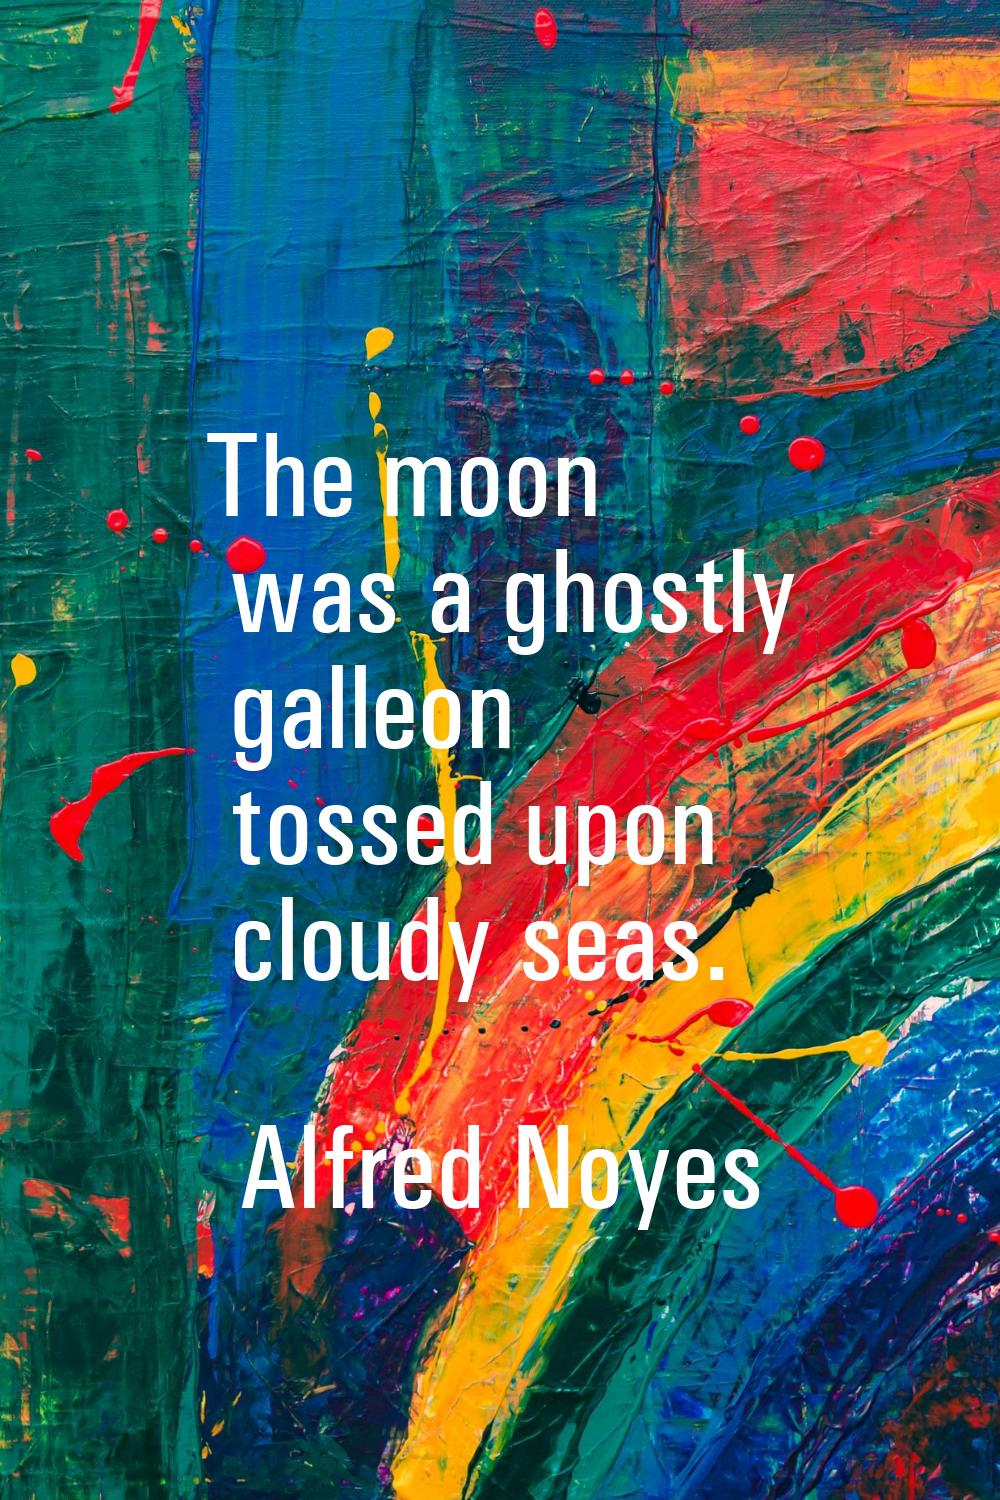 The moon was a ghostly galleon tossed upon cloudy seas.